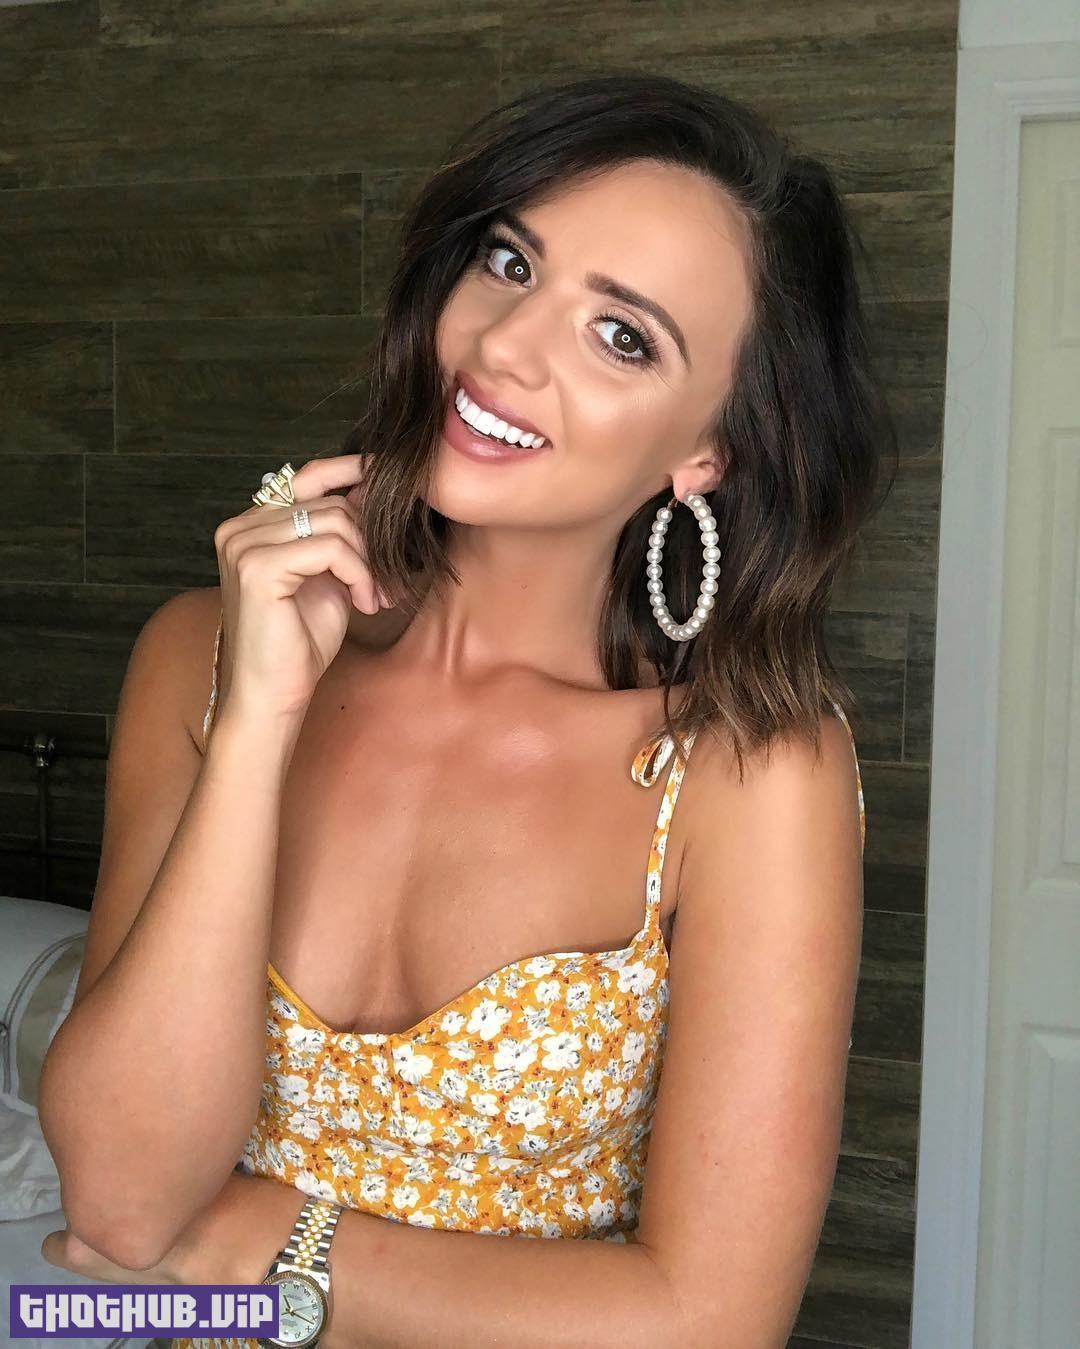 1680444877 68 Lucy Mecklenburgh Nude And Sexy 89 Photos and Videos